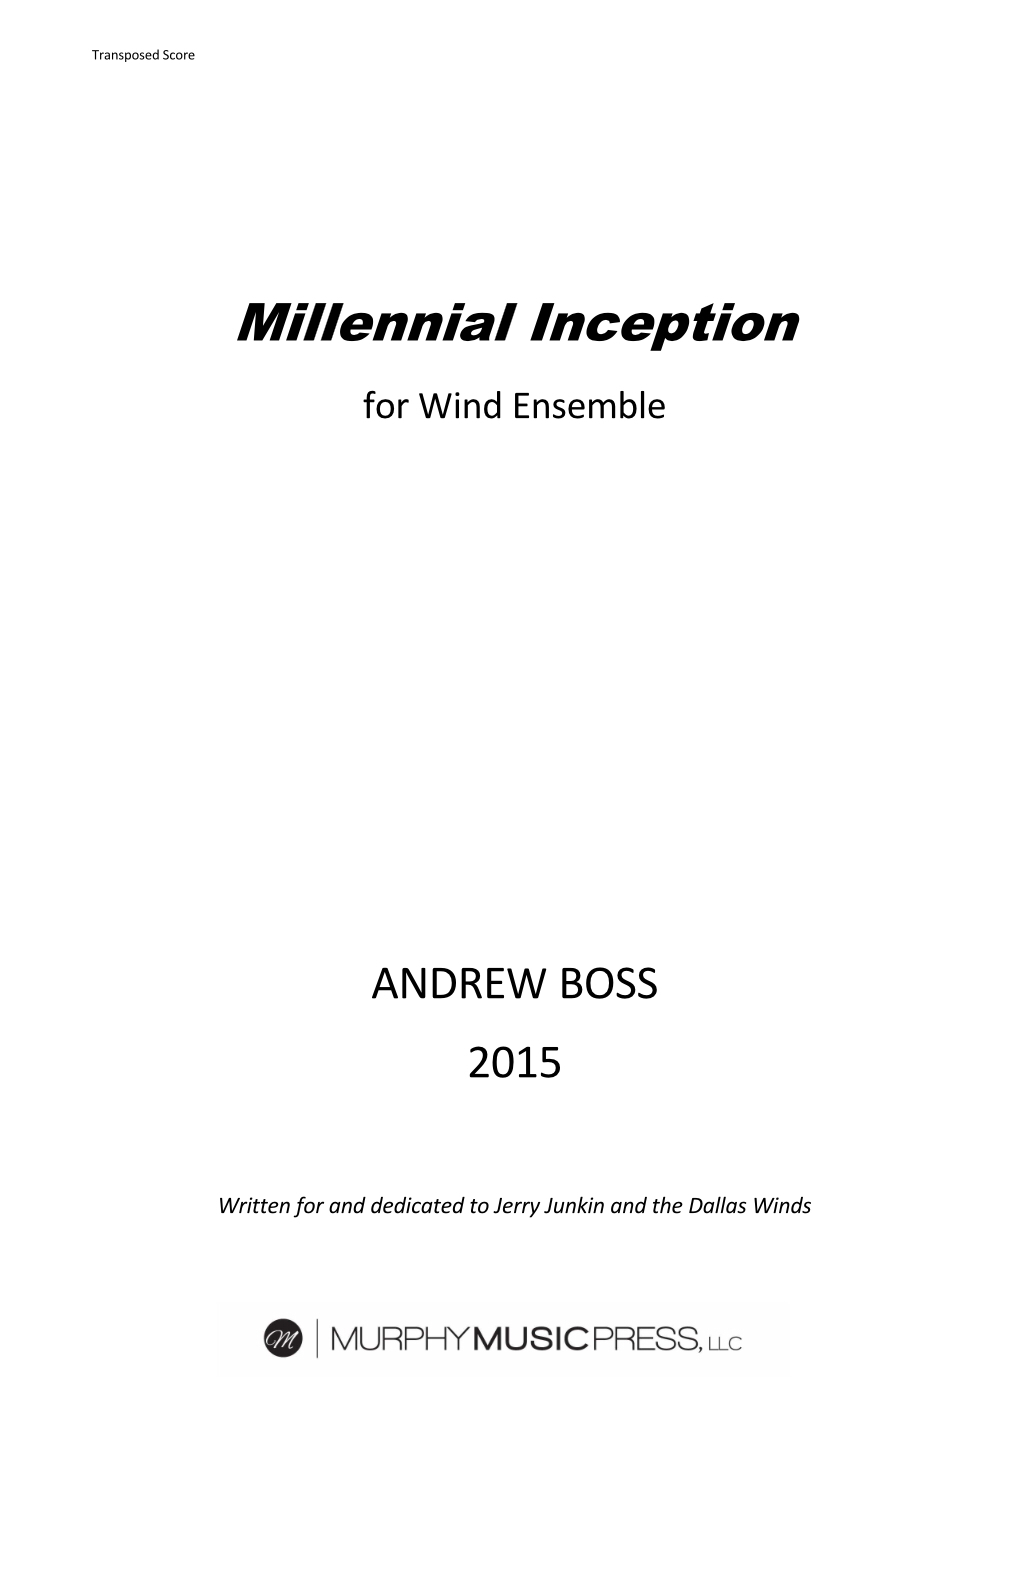 Millennial Inception (antiphonal Instrumentation)  by Andrew Boss